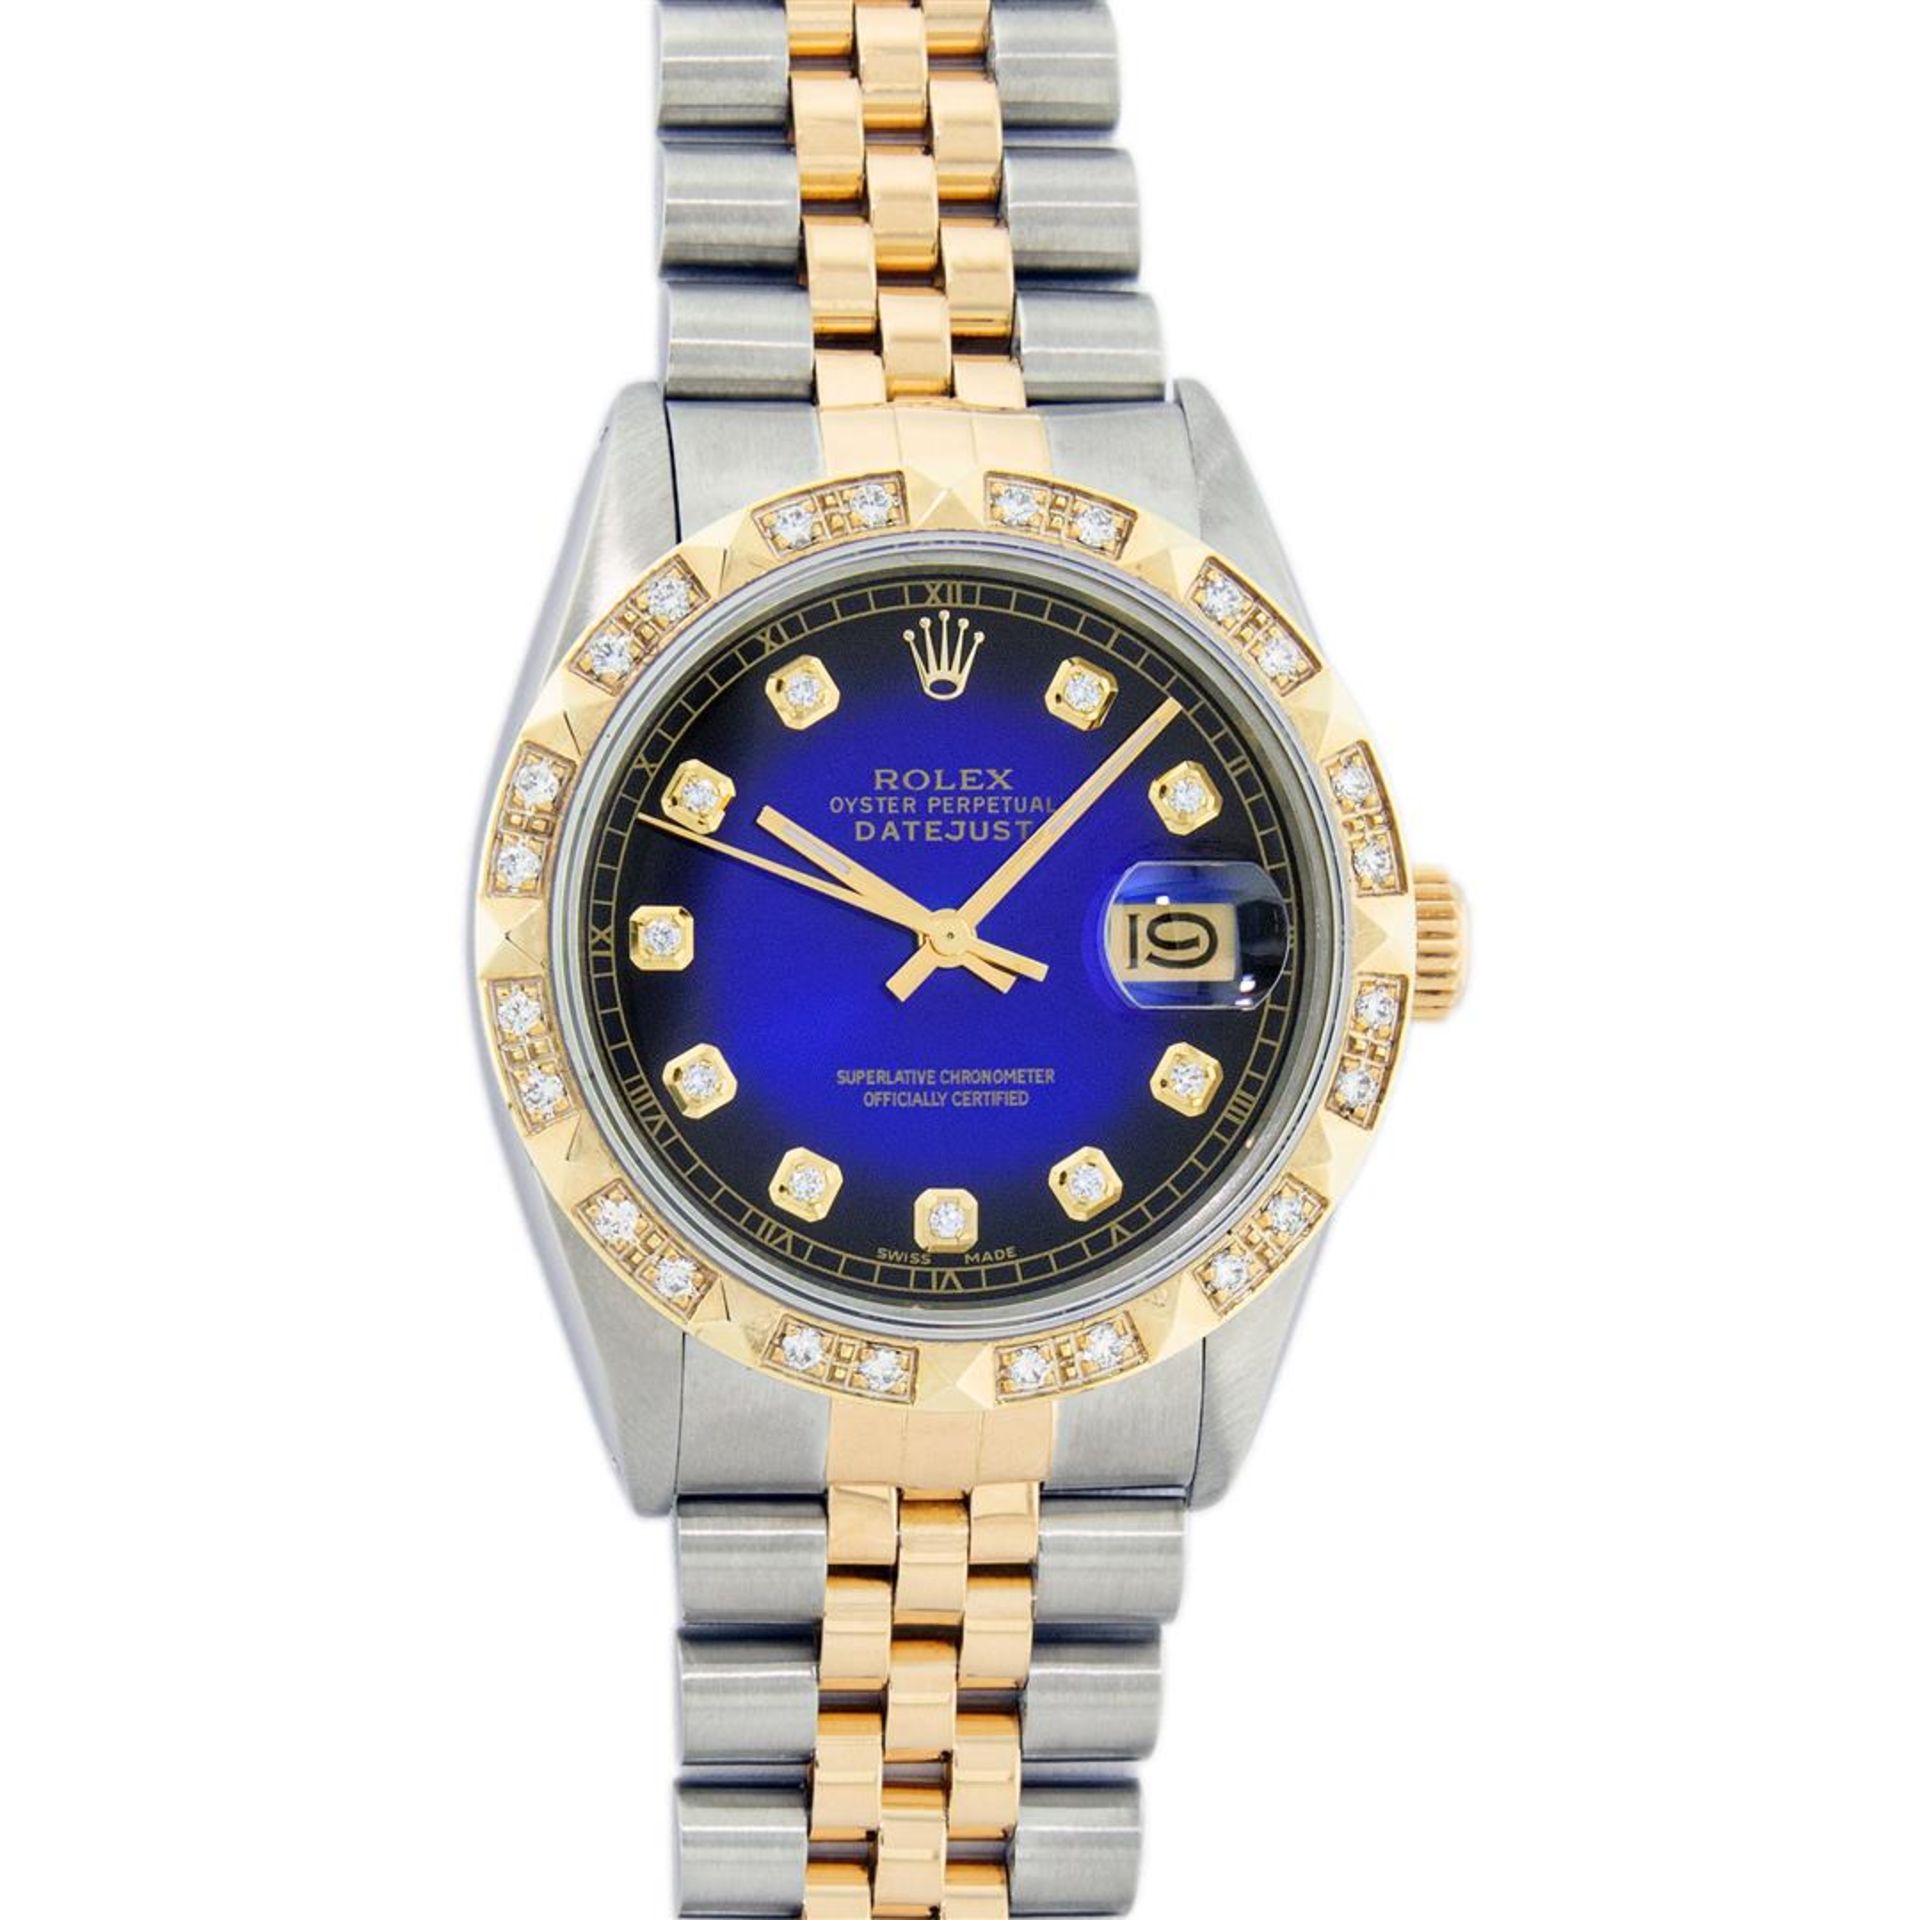 Rolex 2T Blue Vignette Pyramid Diamond Oyster Perpetual Datejust 36MM - Image 2 of 9